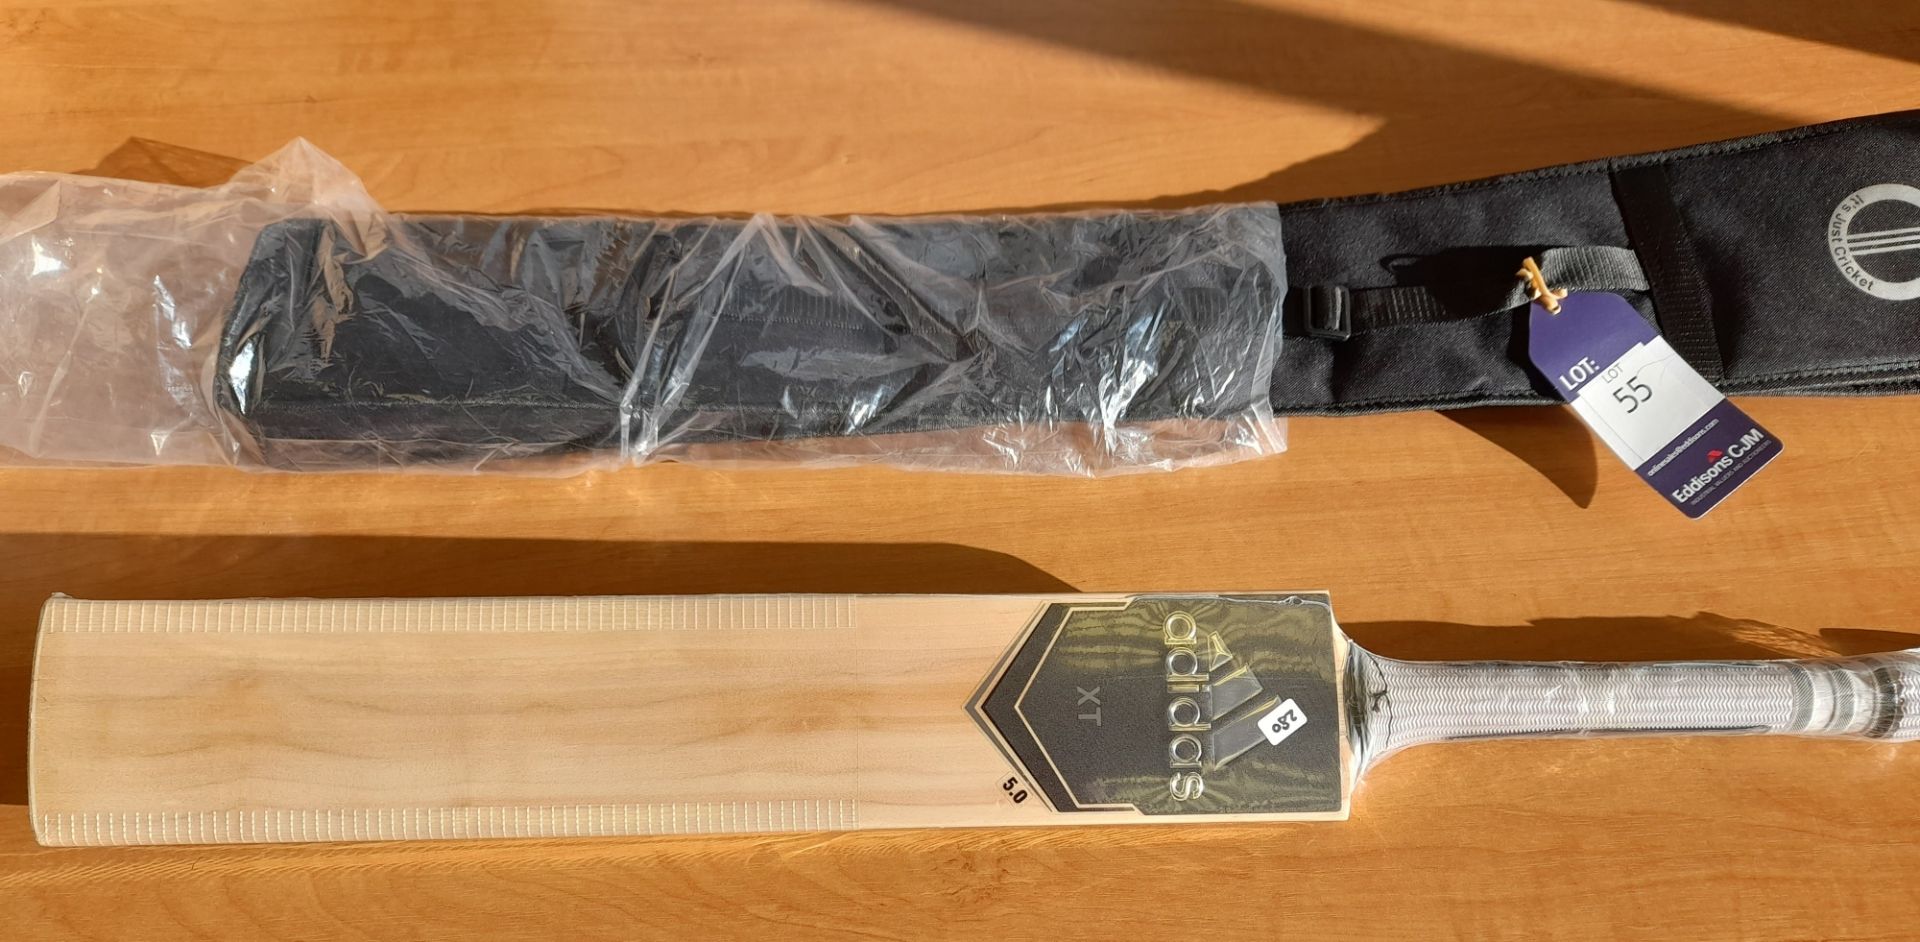 Addidas XT Grey 5.0 Cricket Bat Size 6 with Toe Protector and Bag Cover Rrp. £79.99 - Image 2 of 3